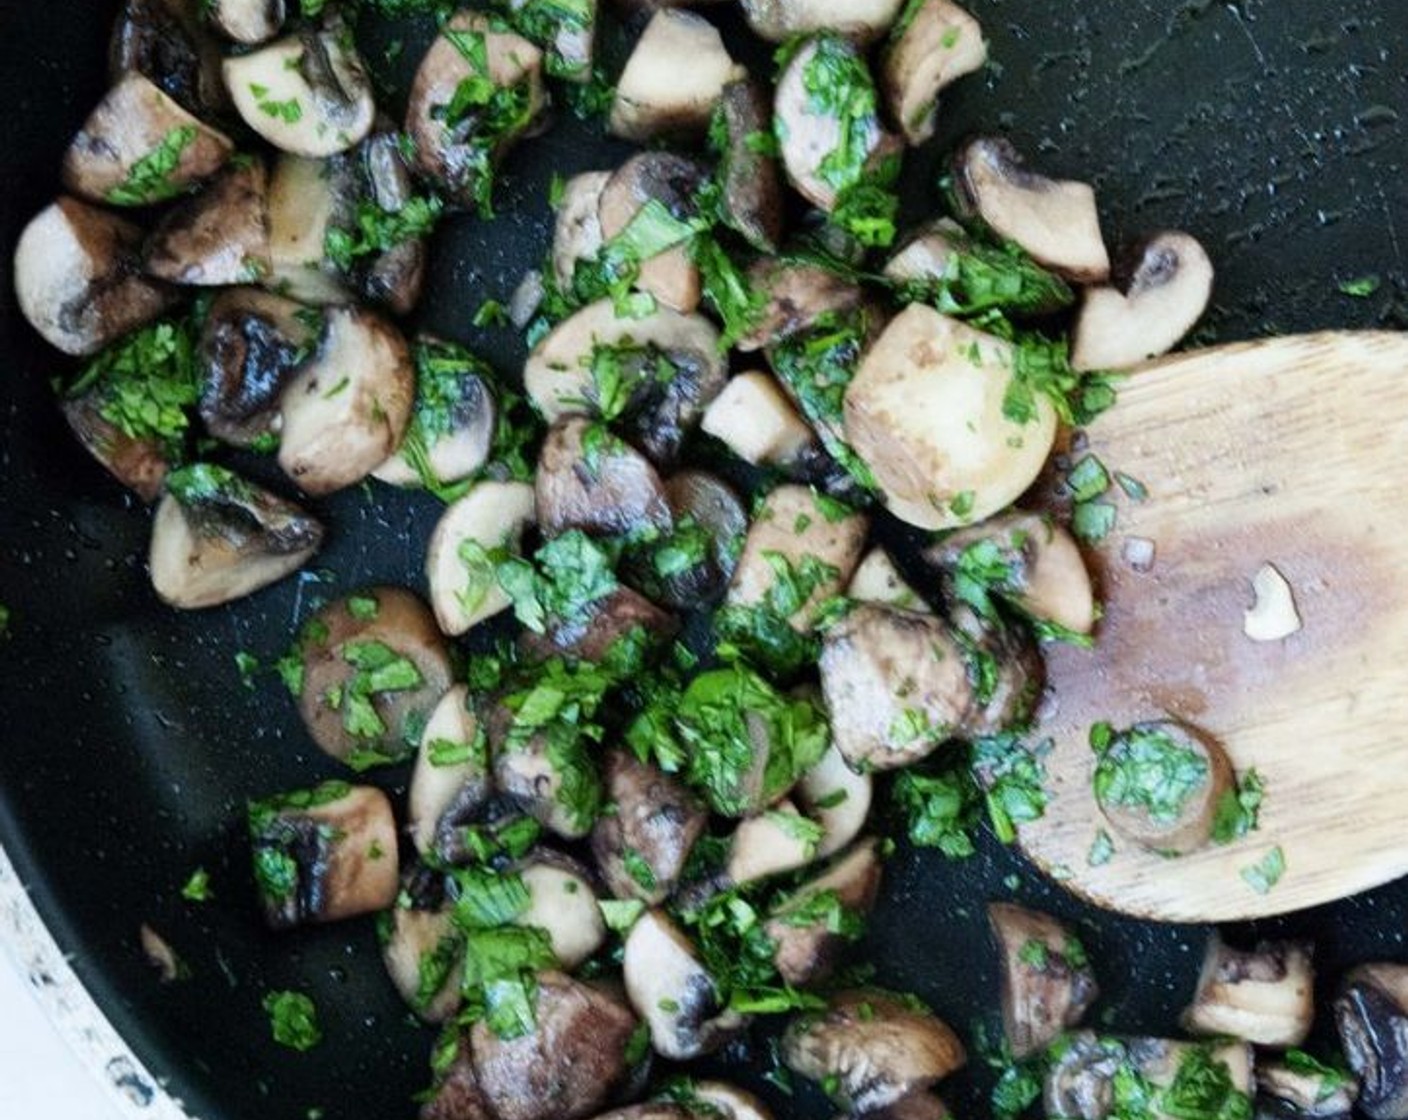 step 4 In a skillet, heat up the Extra-Virgin Olive Oil (1 Tbsp) and the chopped Garlic add the mushrooms, season with Salt (to taste) and Ground Black Pepper (to taste), and cook on medium-high for about 10 min, or until mushrooms start to soften.